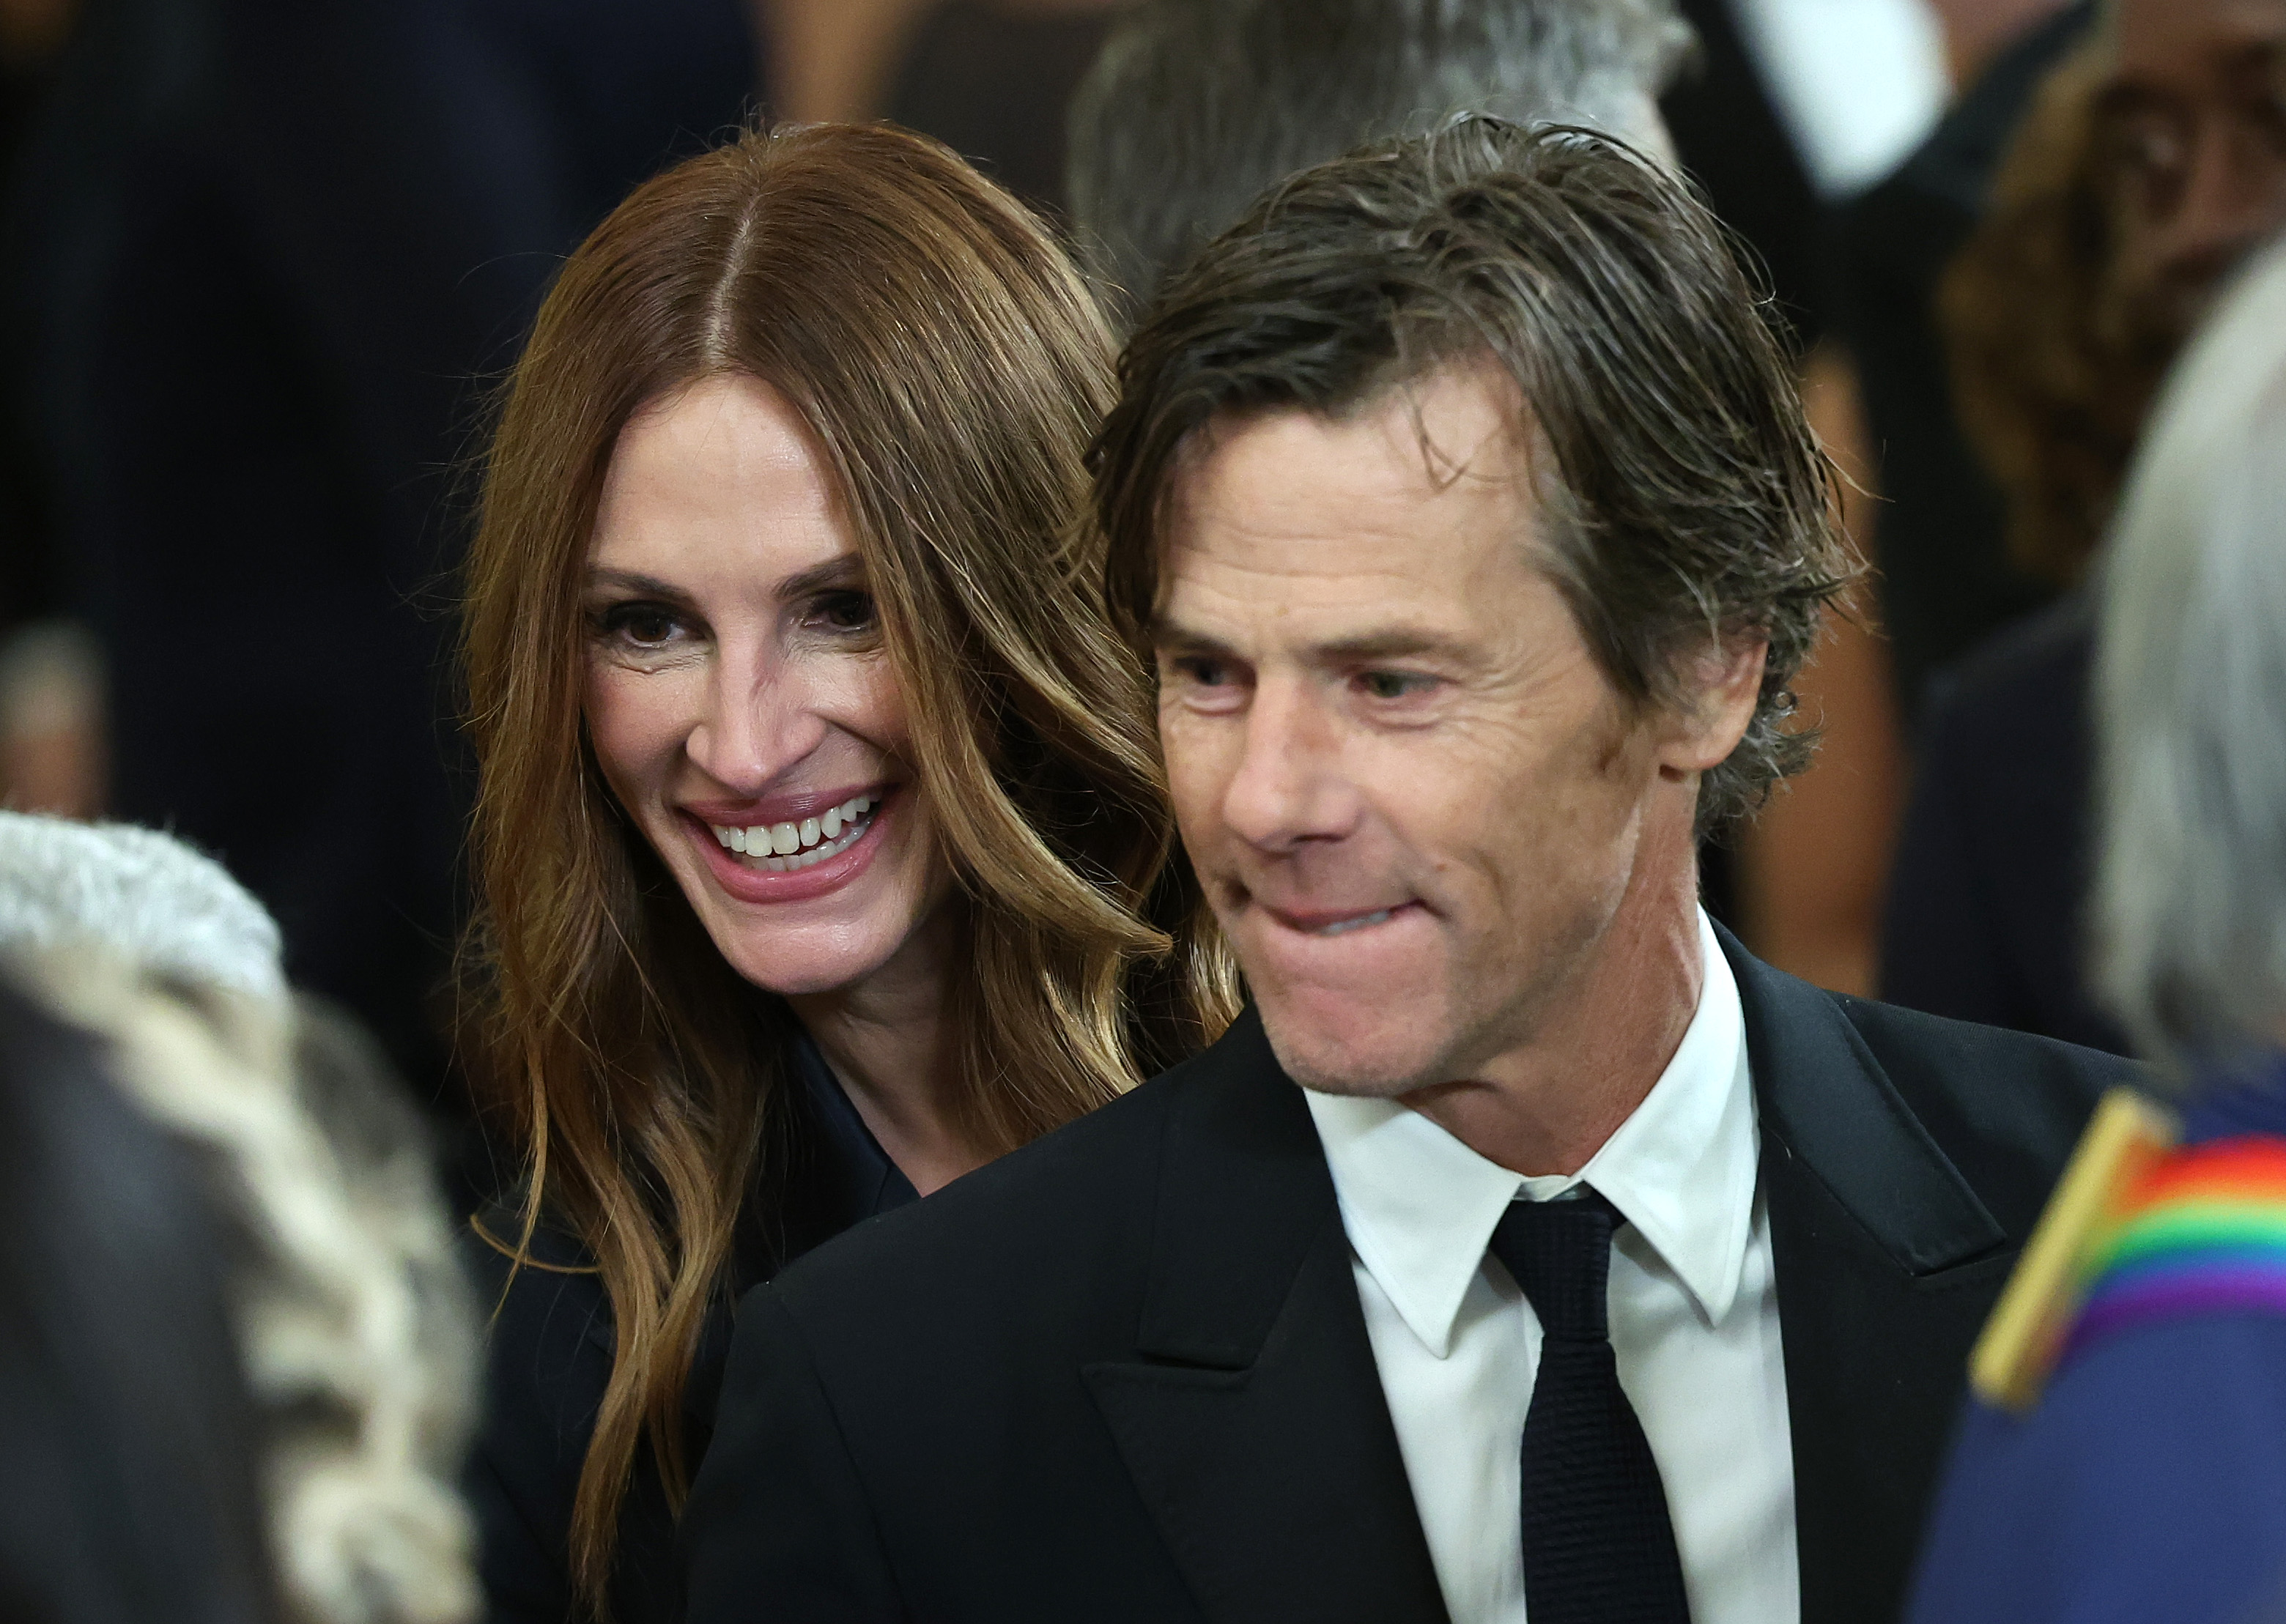 Julia Roberts and her husband, cinematographer Daniel Moder, at the White House on December 4, 2022, in Washington, D.C. | Source: Getty Images